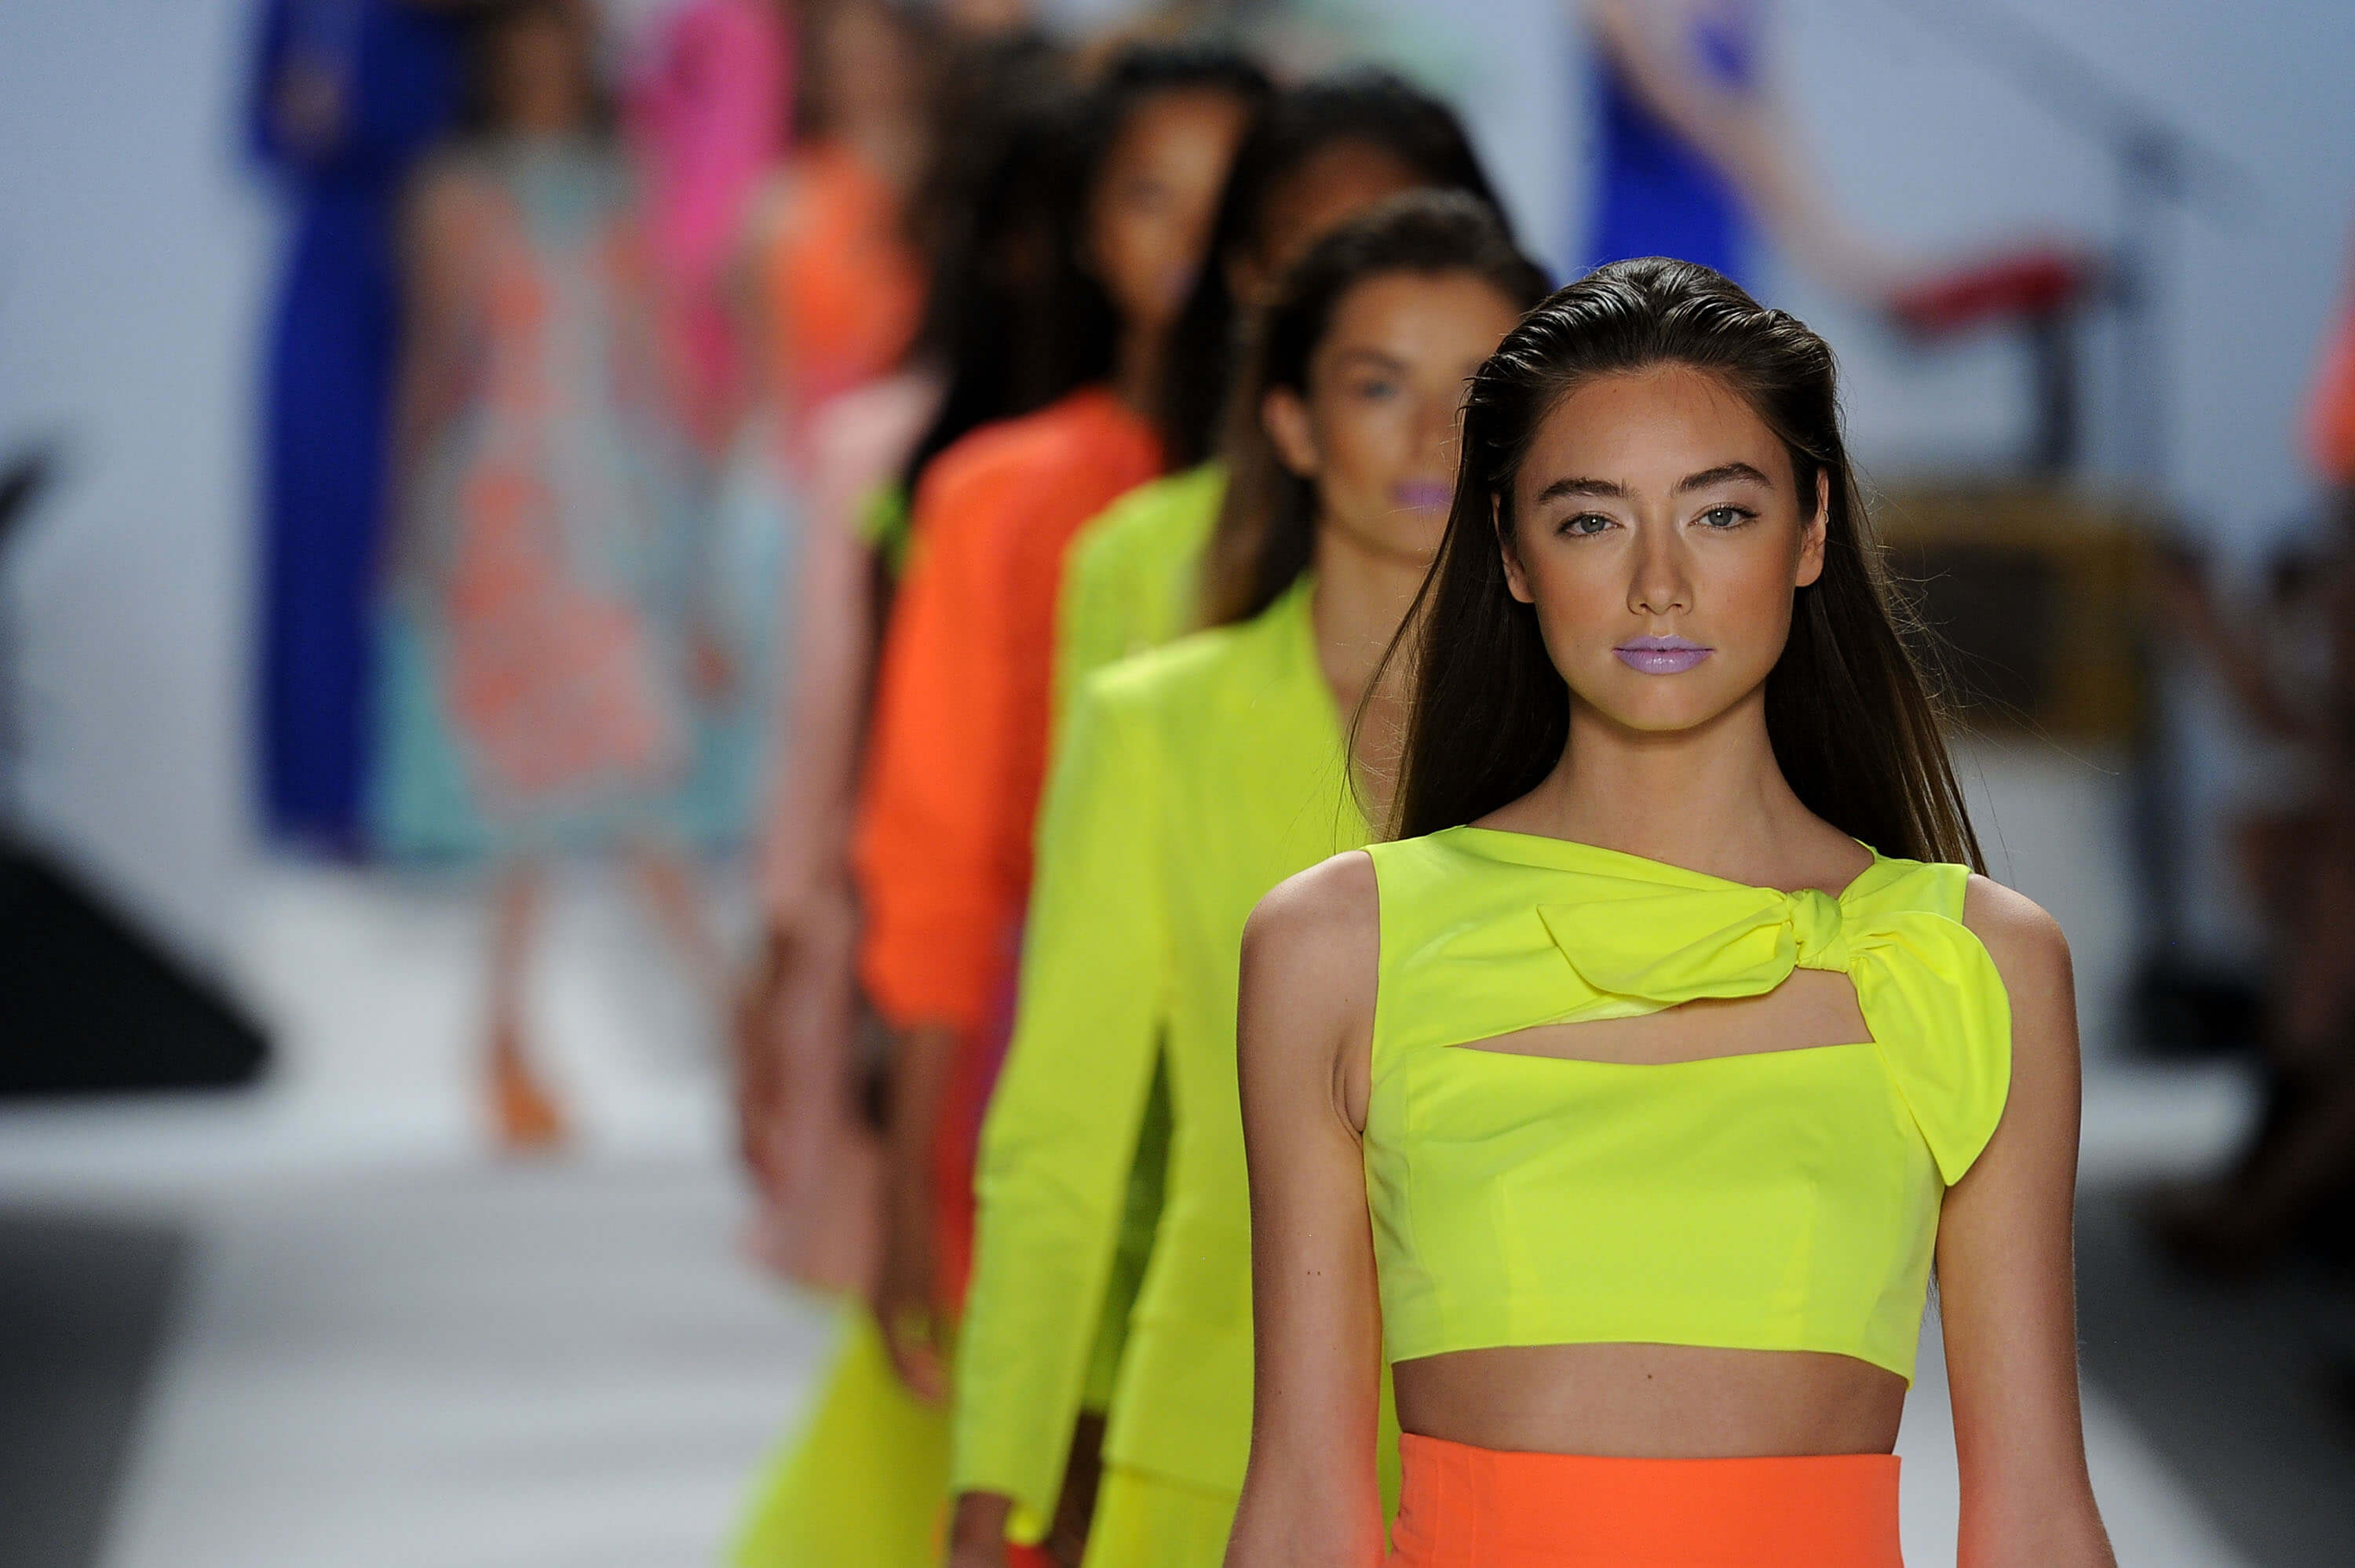 The Do's and Don'ts of Runway Modelling